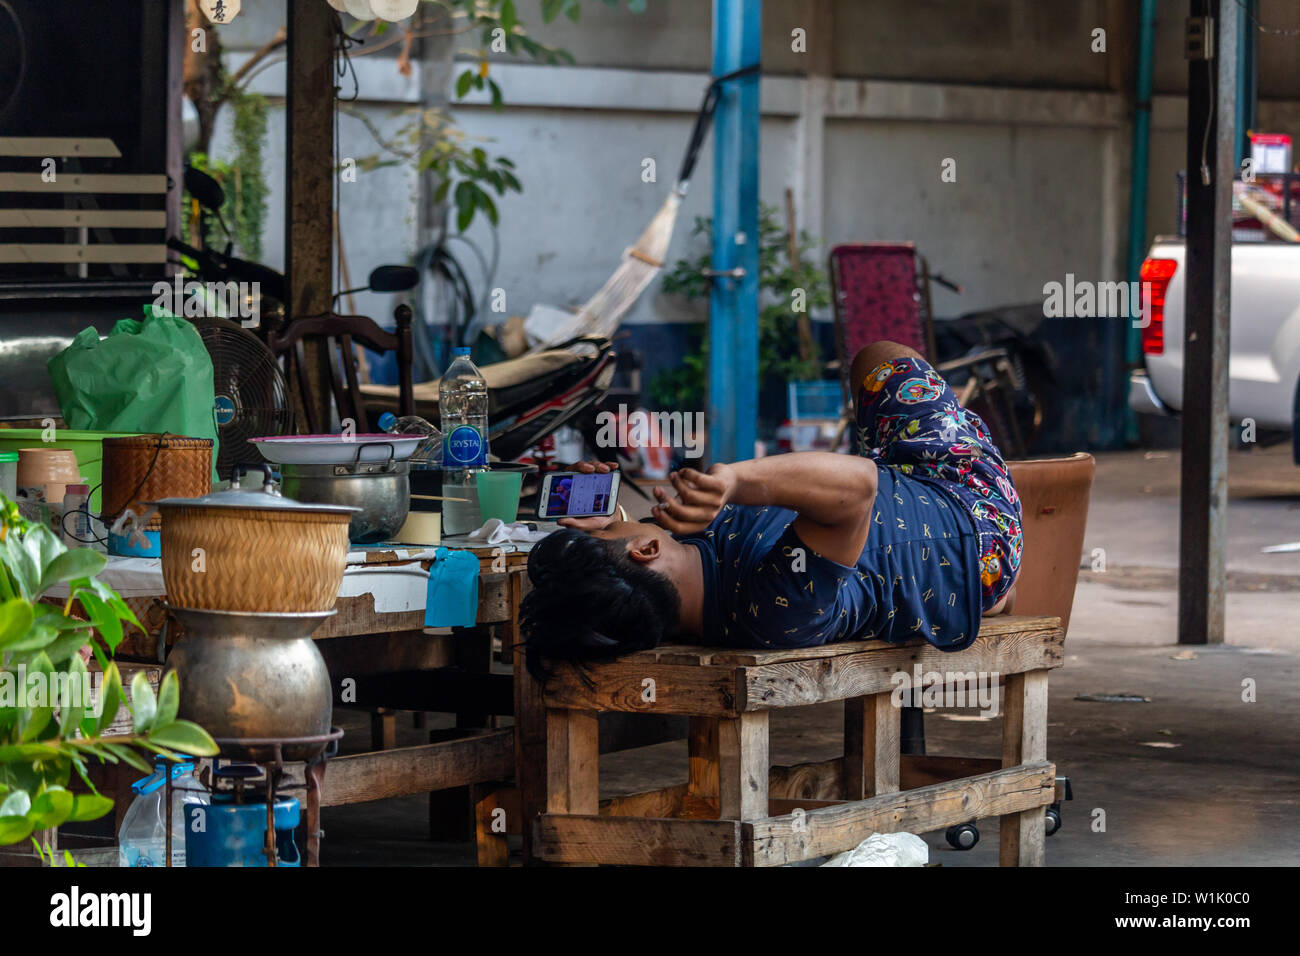 Bangkok, Thailand - April 12, 2019: Man lying on a bench, smoking and listening to music on a street in central Bangkok Stock Photo